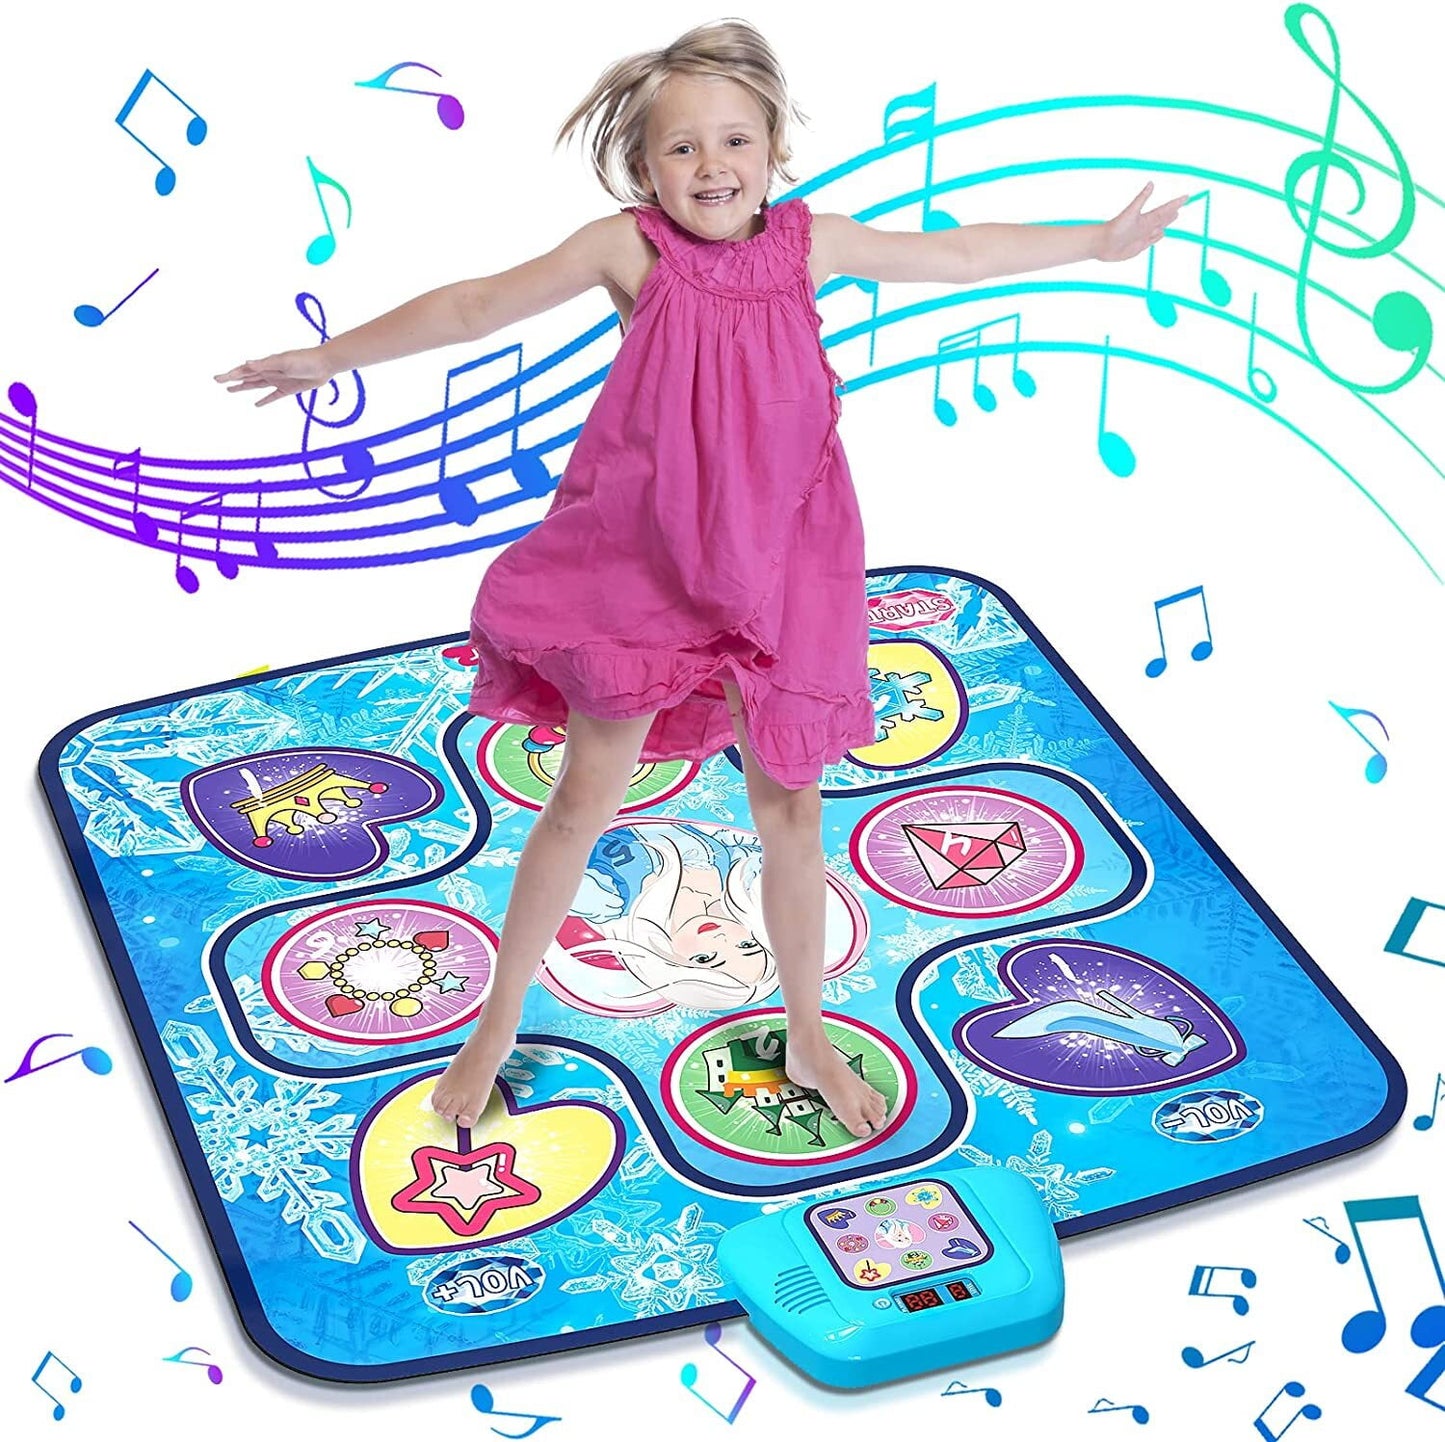 Dance Mat,Frozen Themed Dance Pad Music Games Toy for Kids Birthday Gifts for little girls 3-12 Year Old